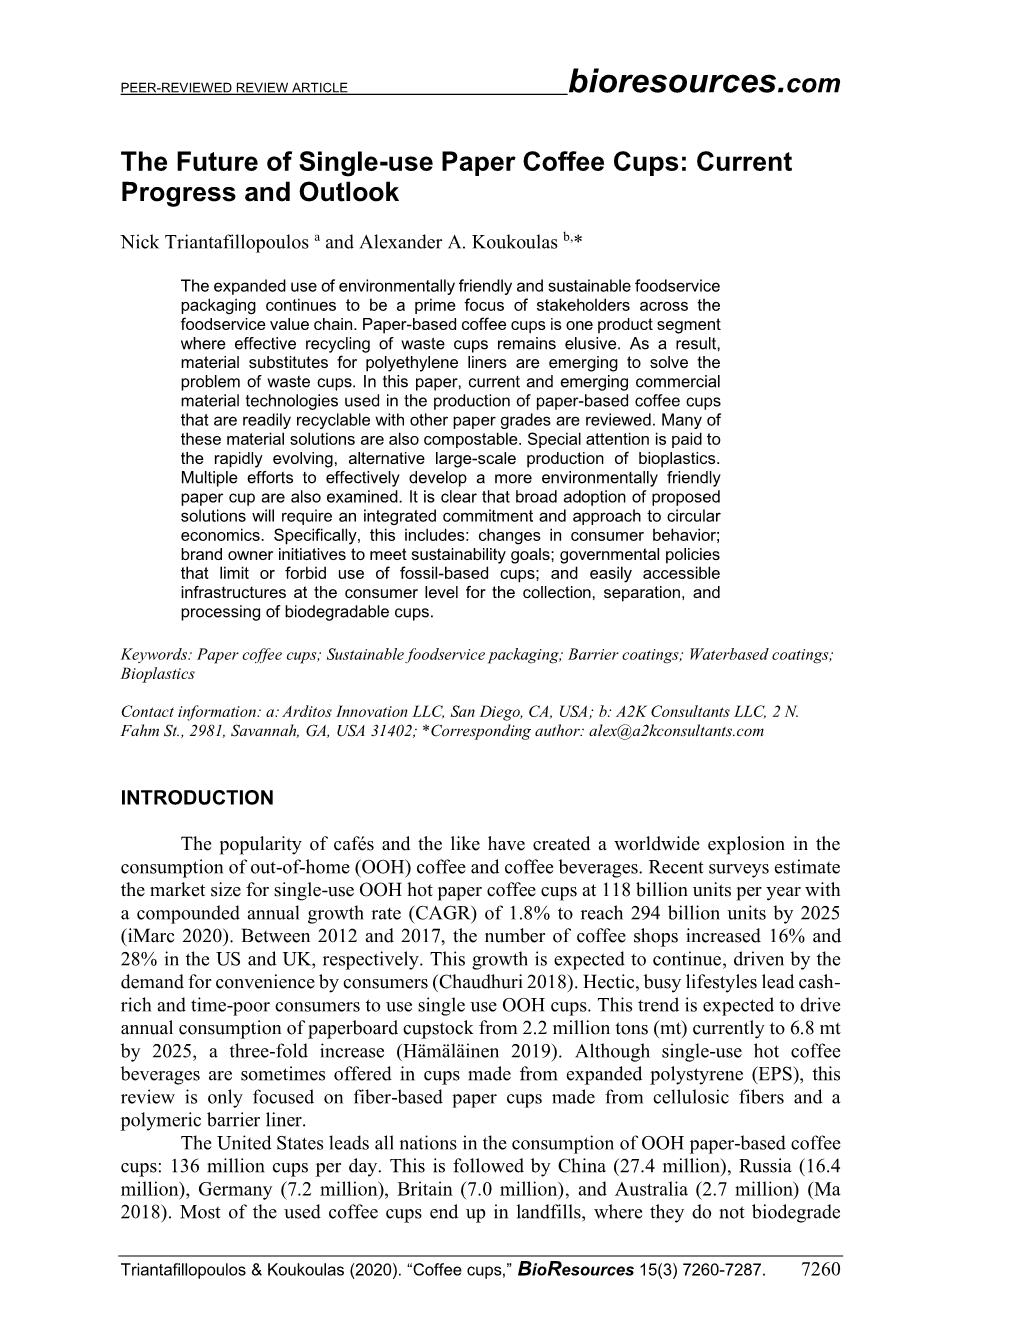 The Future of Single-Use Paper Coffee Cups: Current Progress and Outlook